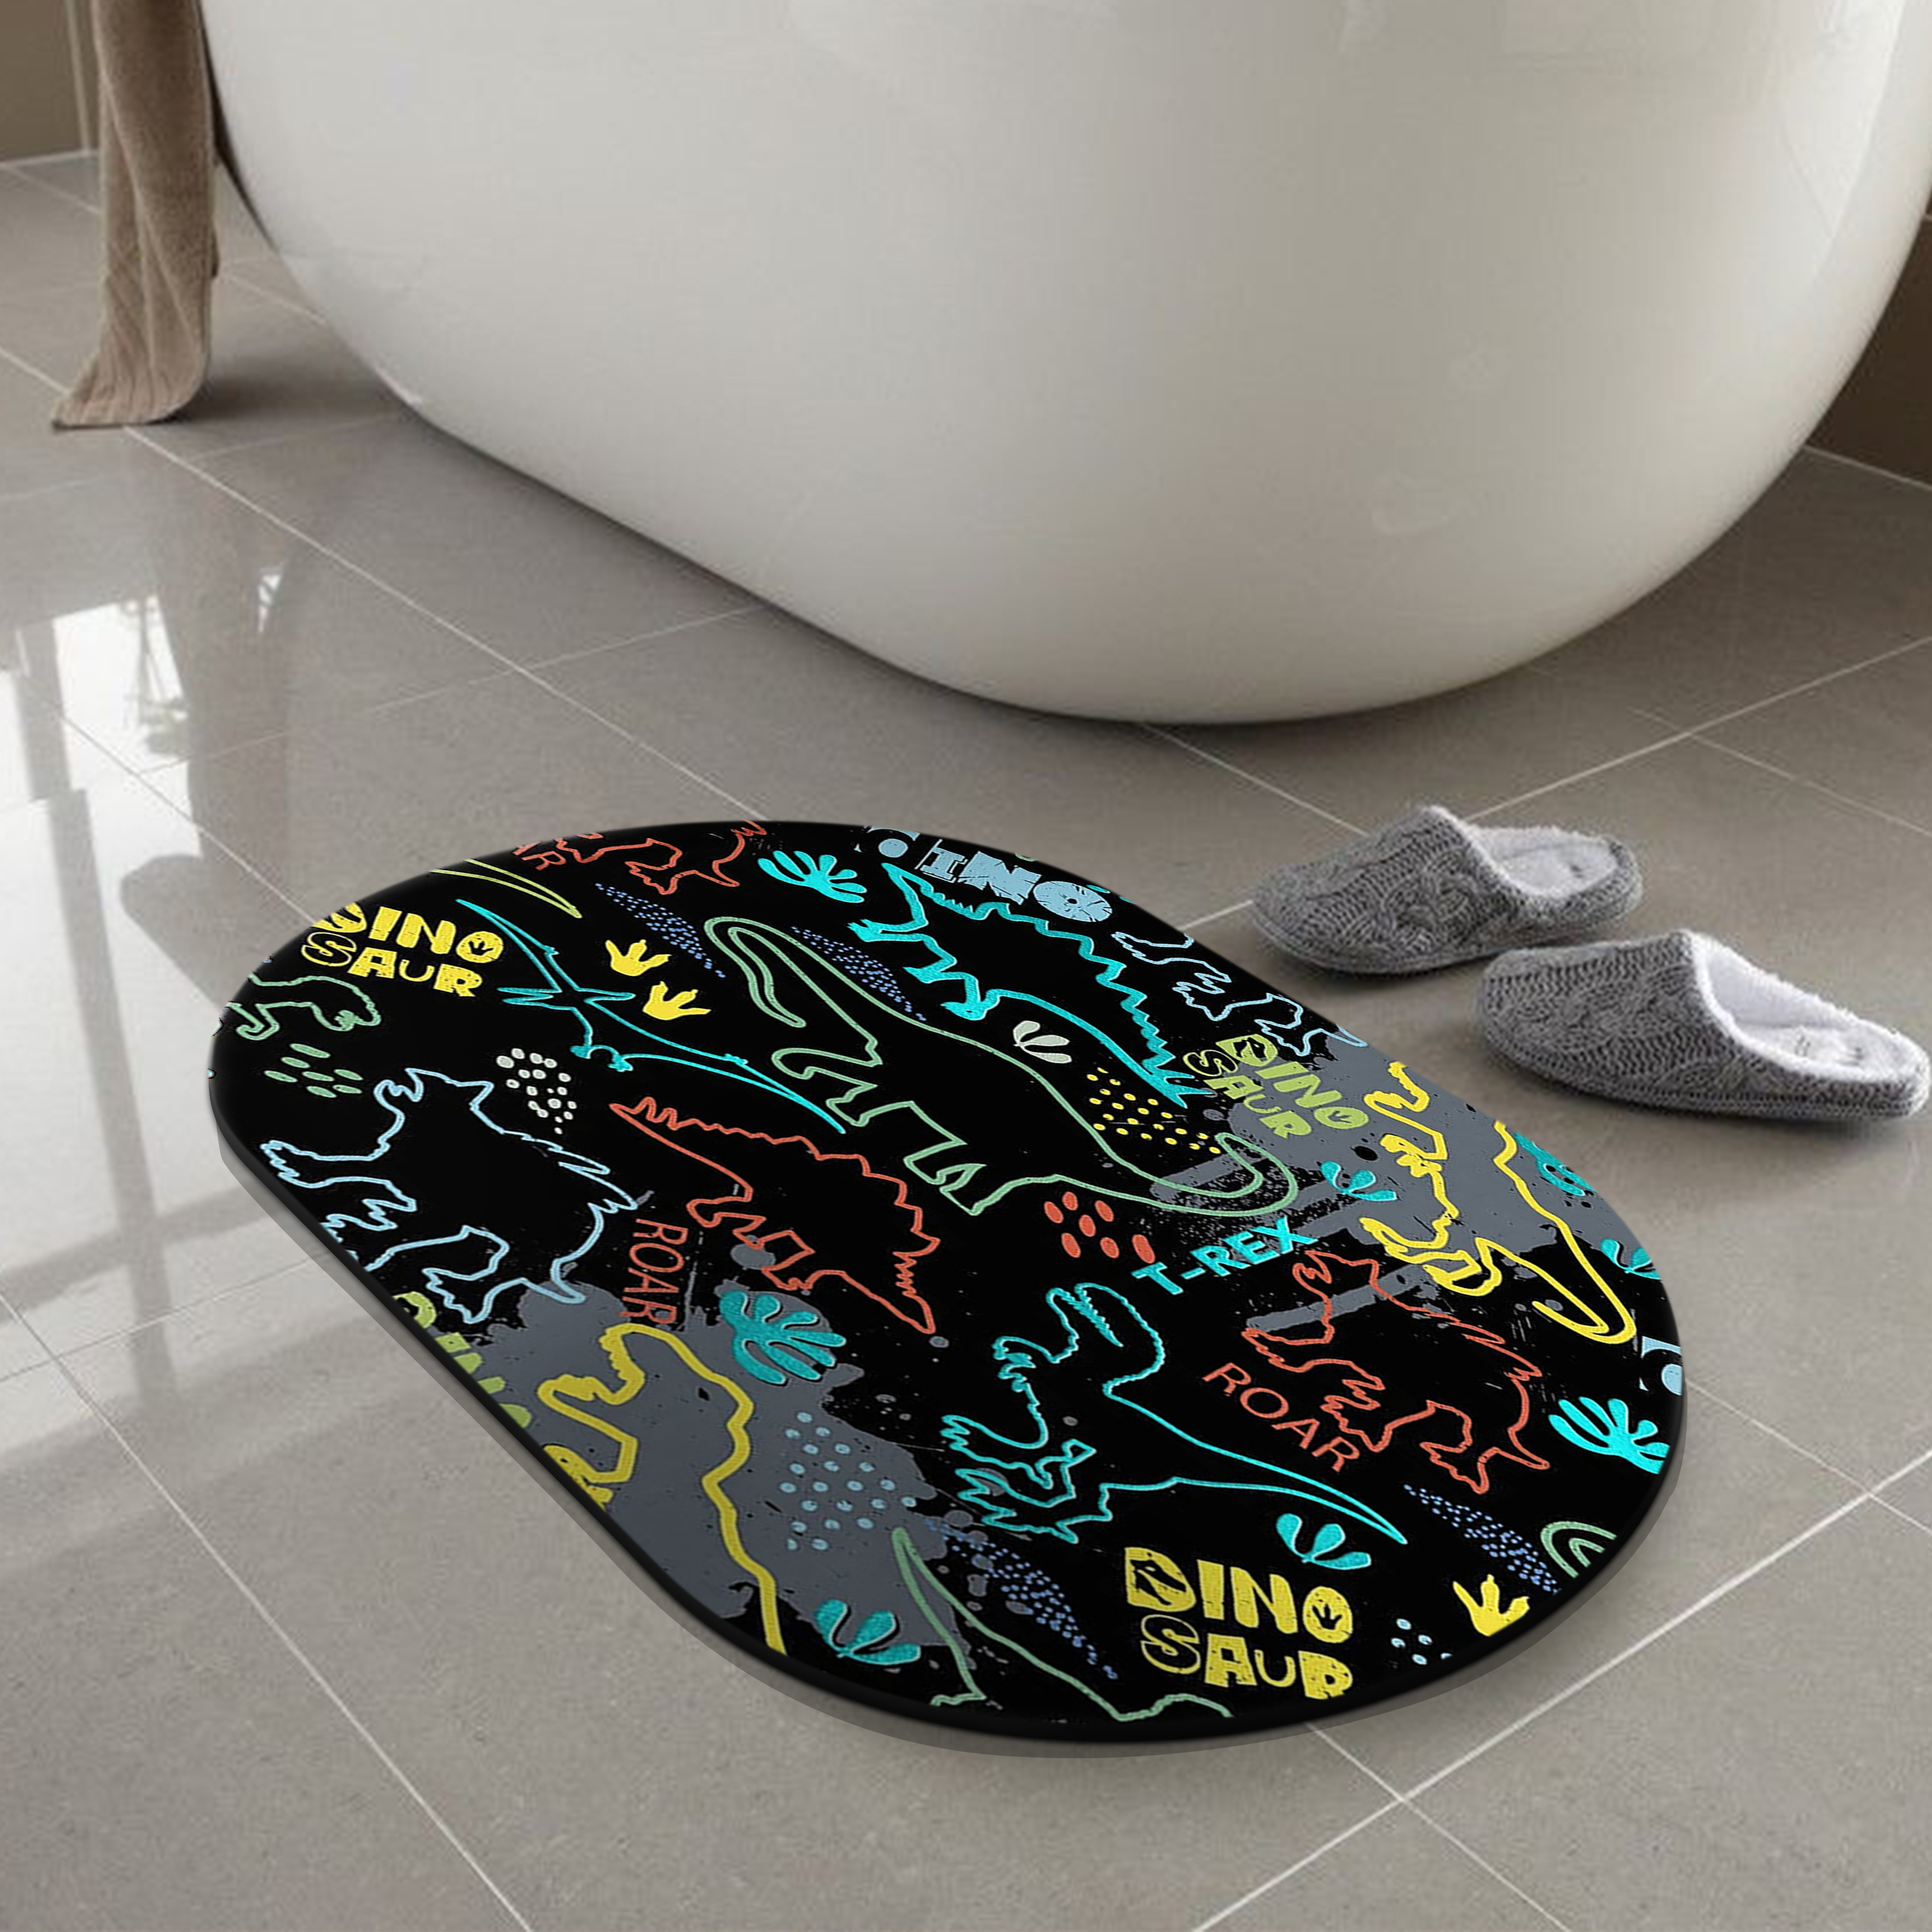 Diatom Mud Bathroom Anti-slip Mat, Mexican Colored Floral Super Absorbent Outdoor  Doormat With Non-slip Rubber Backing, Geometric Abstract Floral Texture  Bath Mat, Porch Entrance Shoes Boots Entrance Floor Mat Carpet, Home Decor